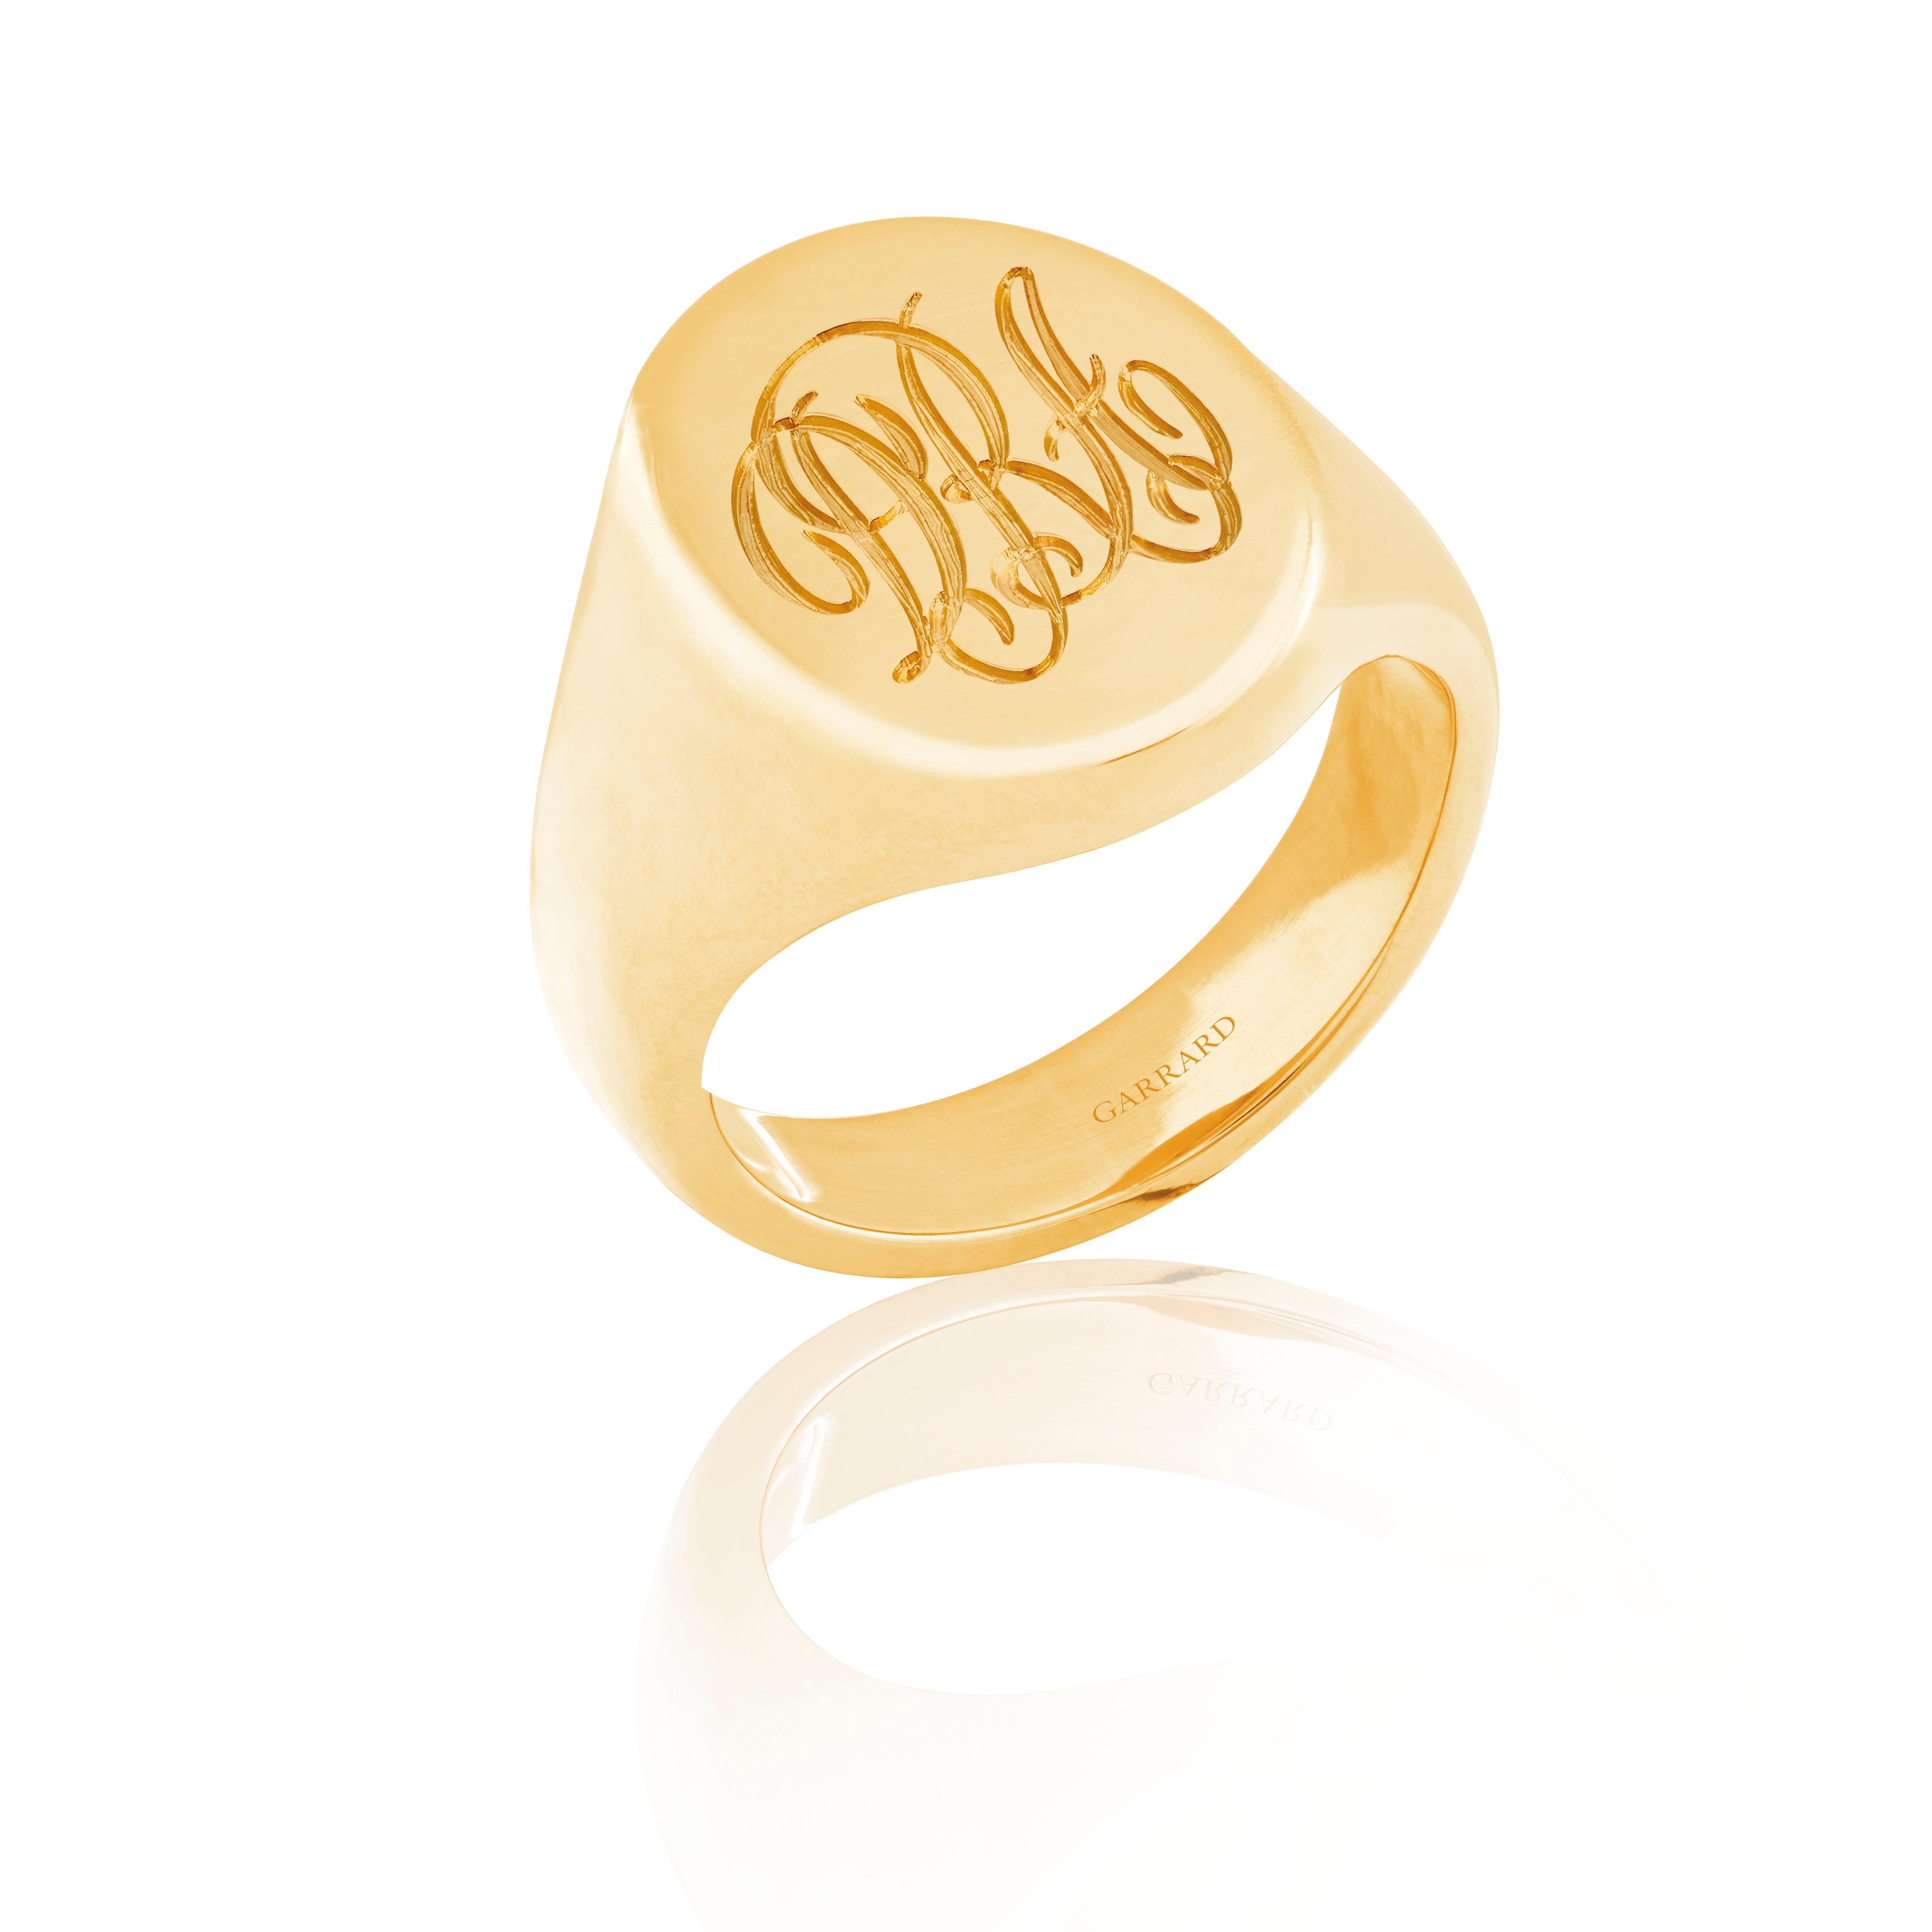 A House of Garrard 18 karat yellow gold small oval signet ring.

Head dimension: 12mm x 10mm
Size 45

Complimentary engraving of up to three initials in a script font is included. Please allow an additional two weeks to the standard shipping and